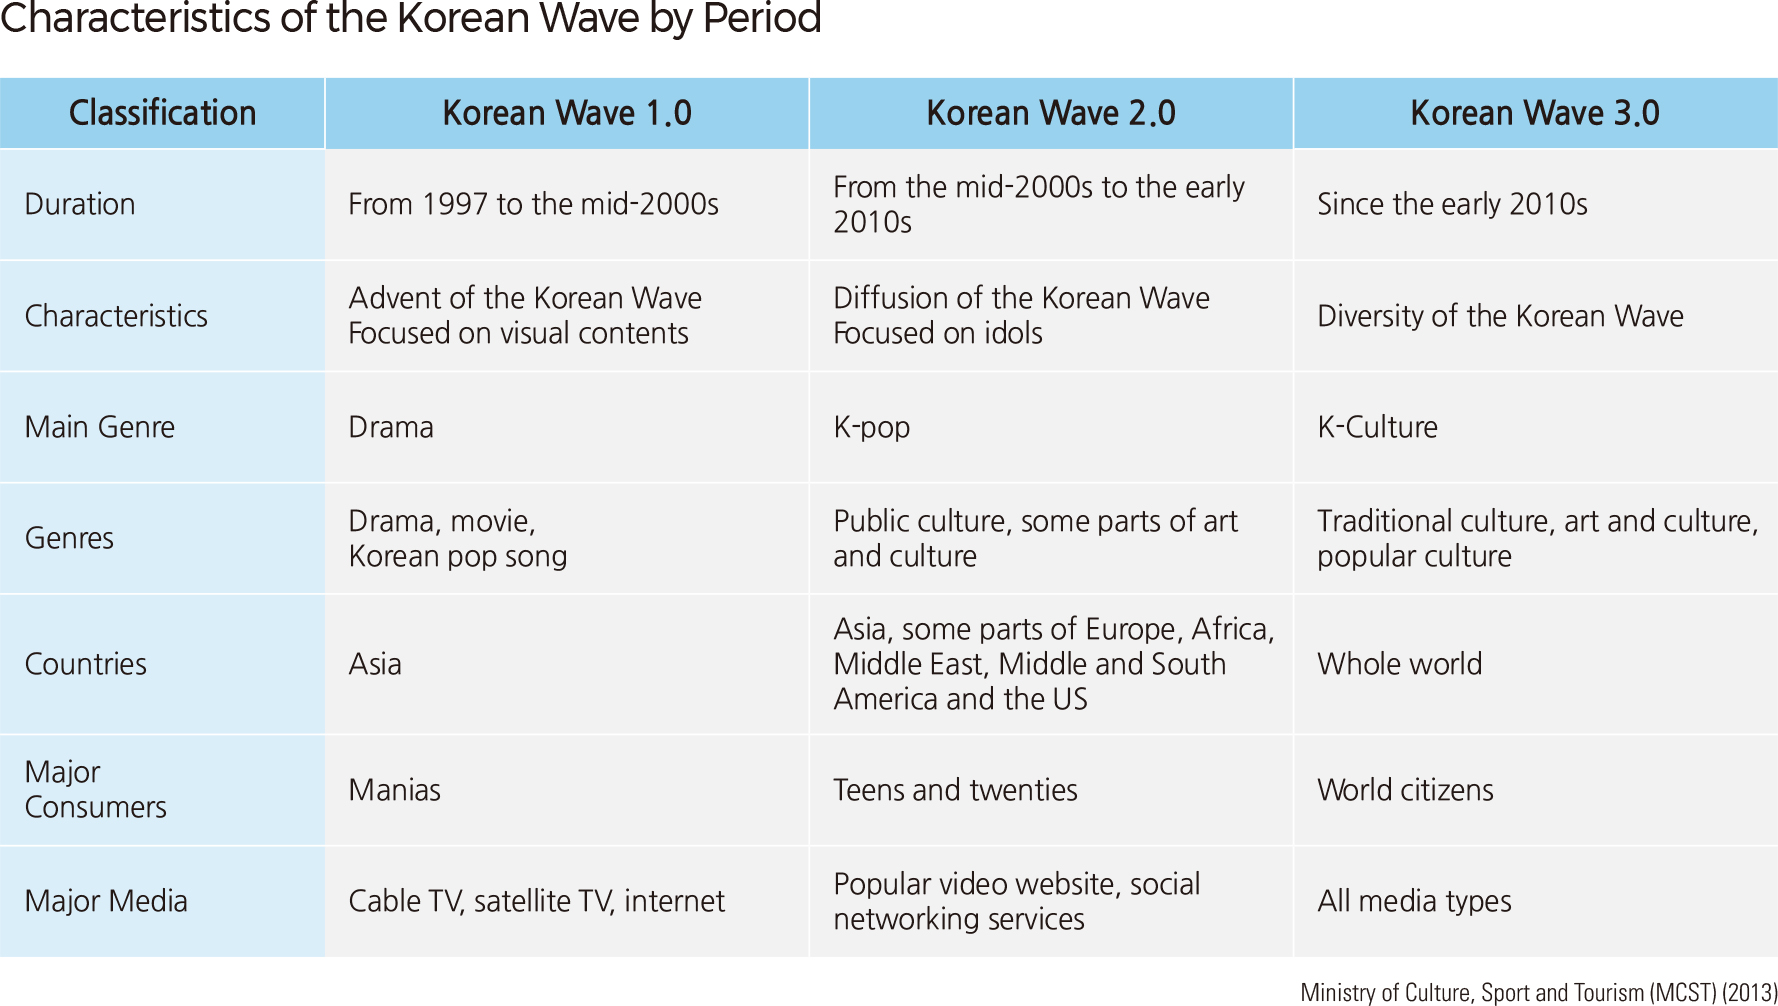 Characteristics of the Korean Wave by Period